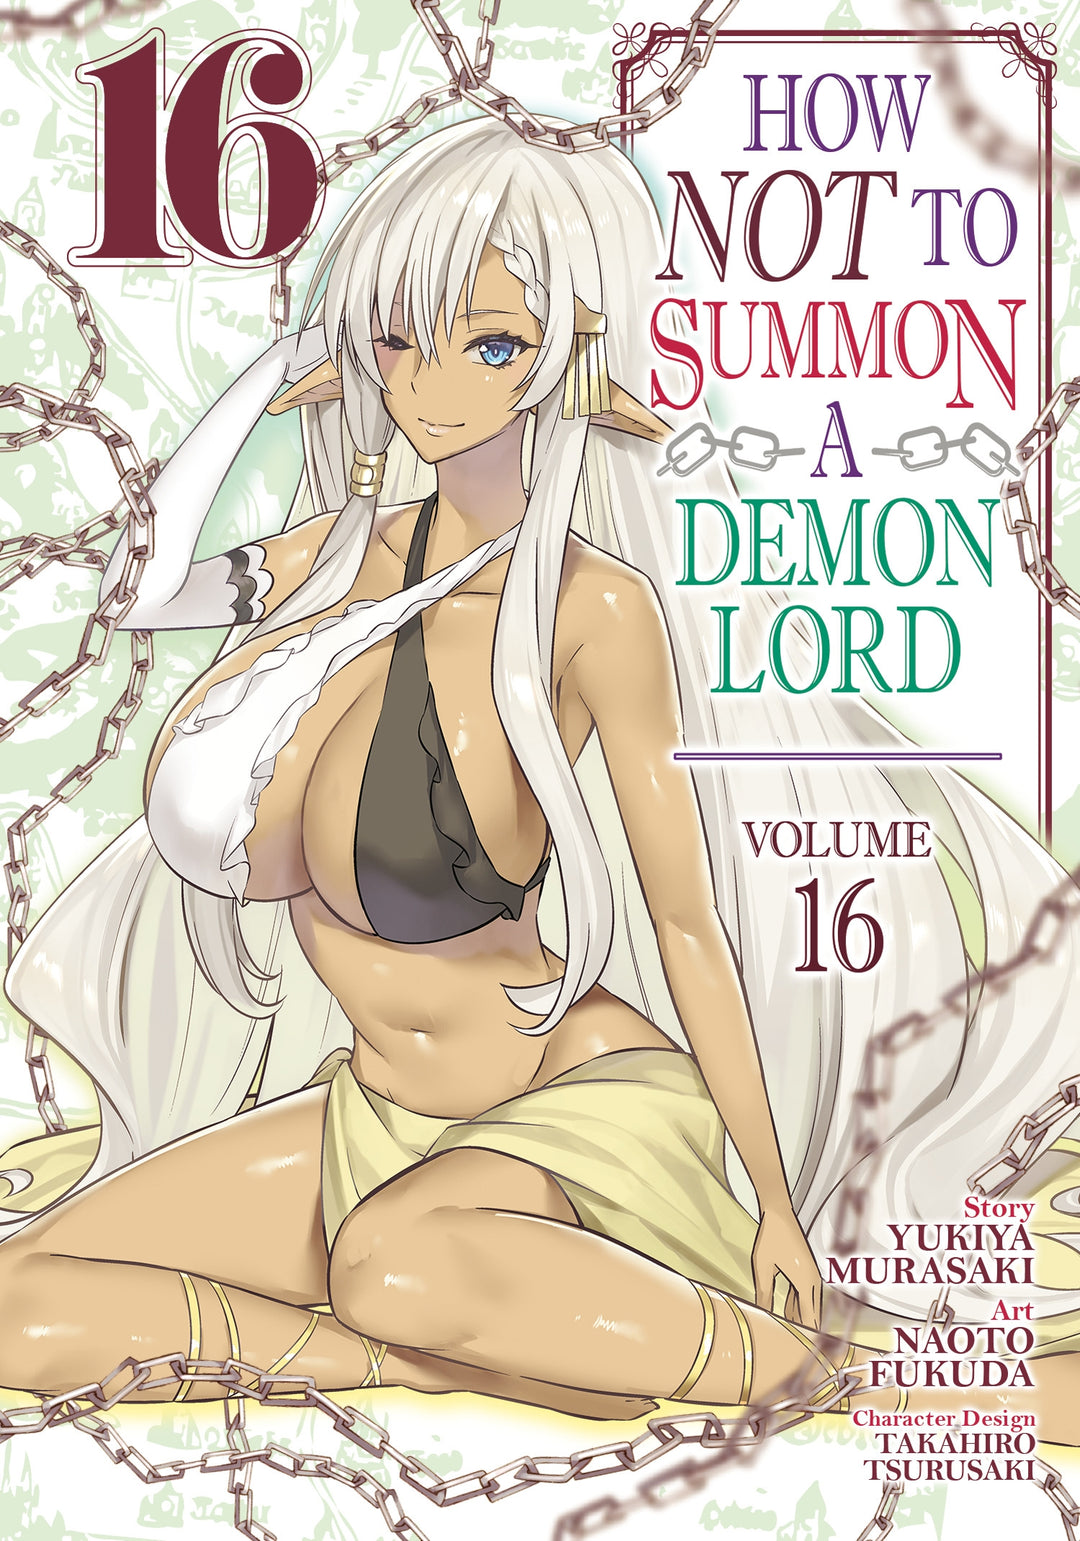 How NOT to Summon a Demon Lord (Manga), Vol. 16